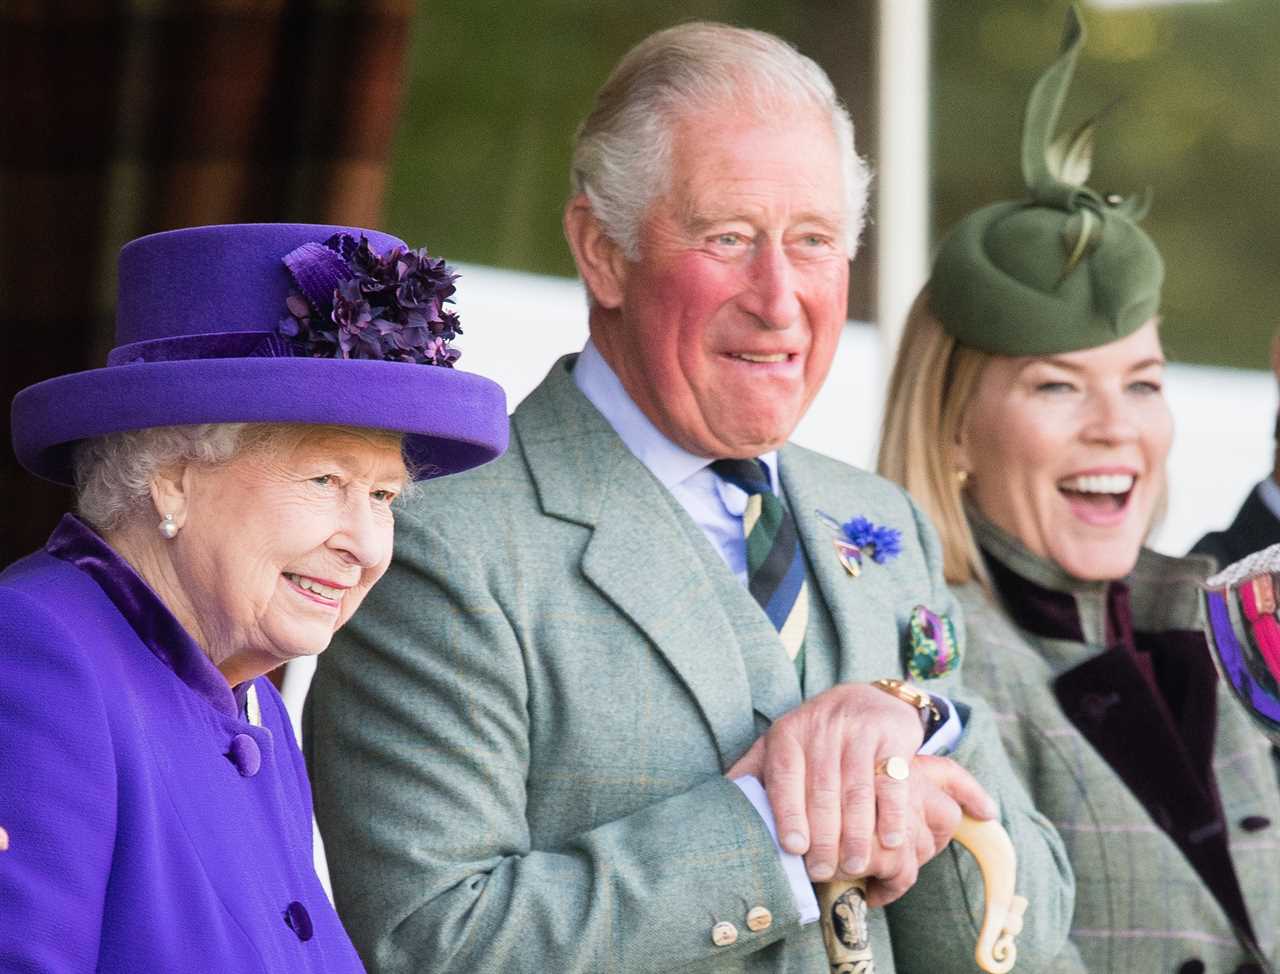 Queen, 95, WAS with Prince Charles days ago but does NOT have symptoms as he tests positive for Covid